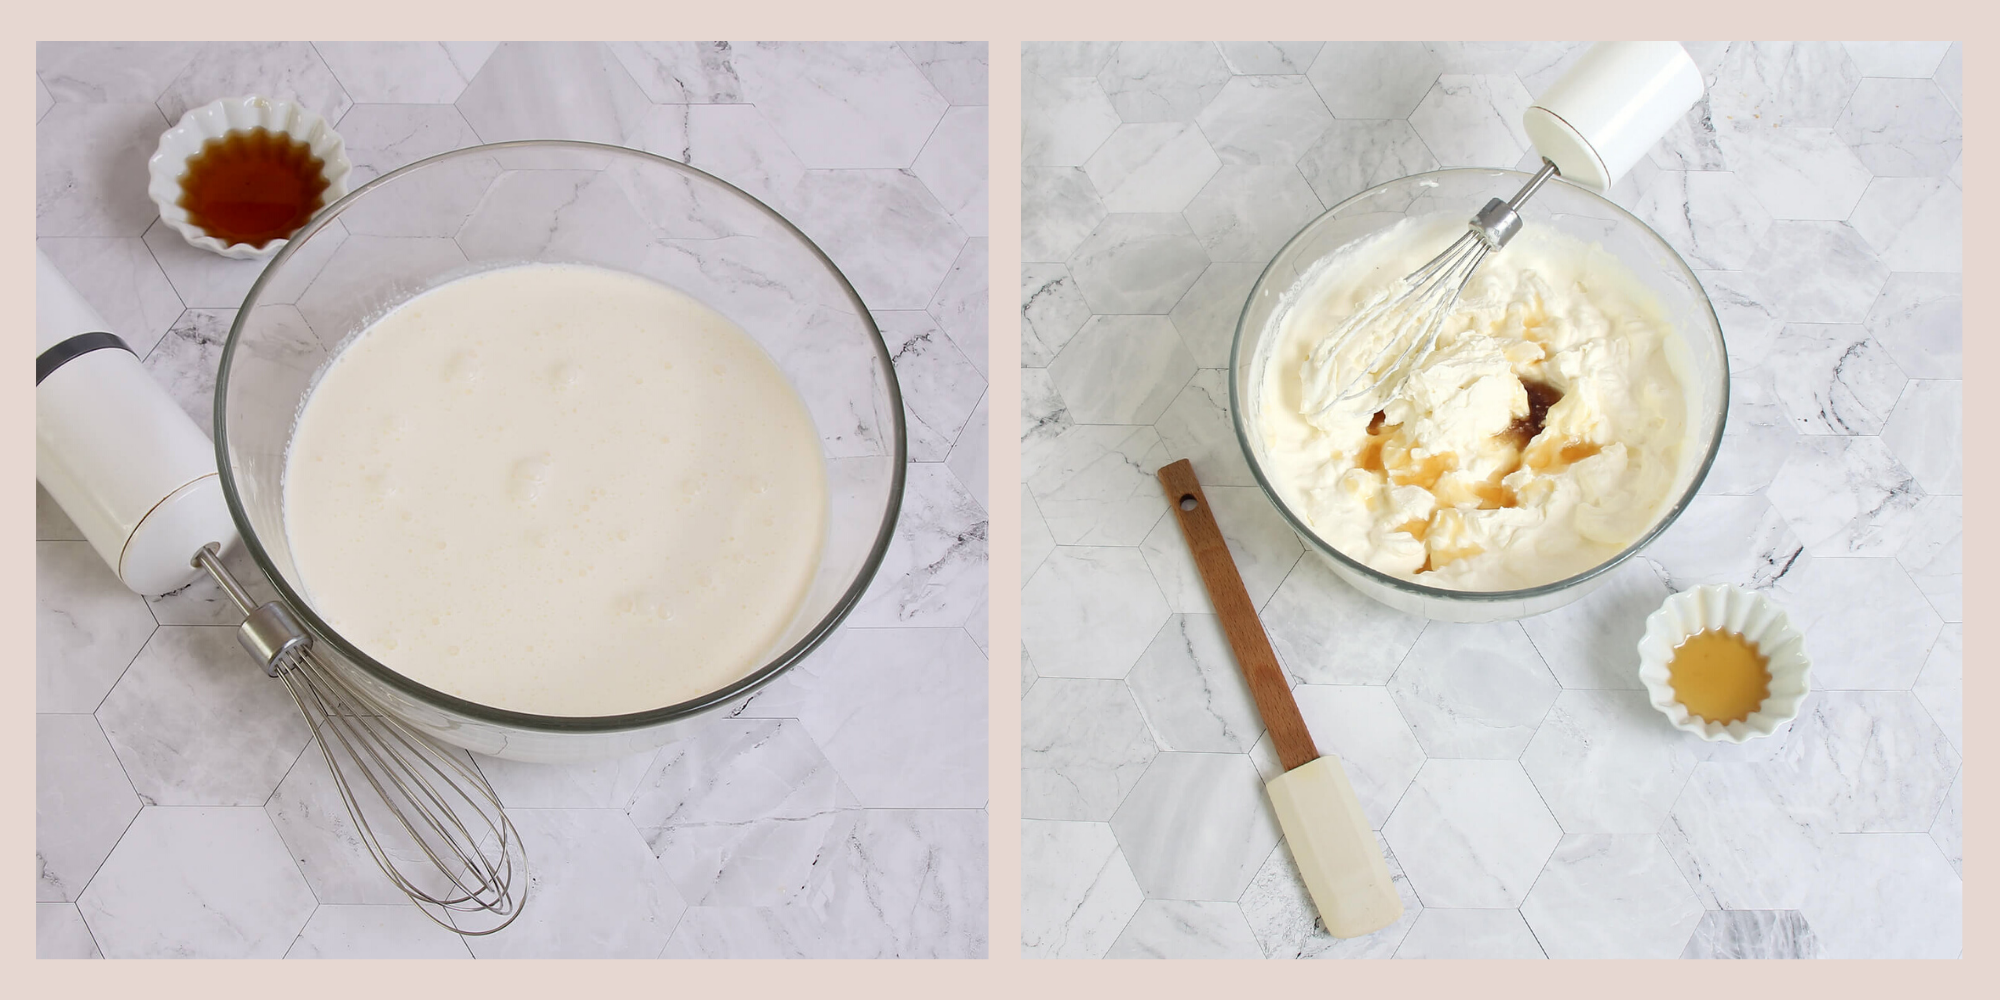 making the maple whipped cream